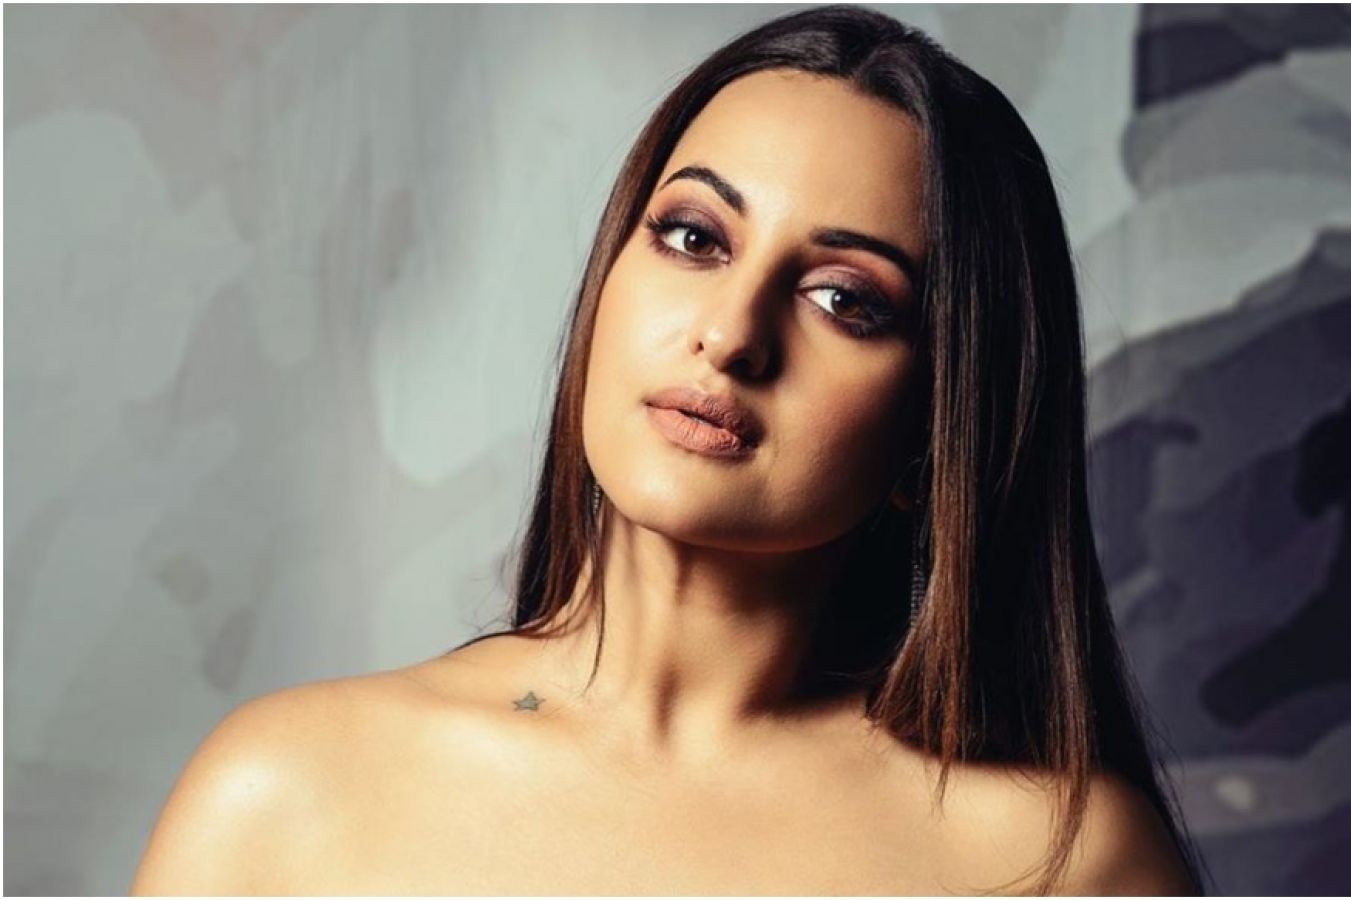 Sonakshi Sinha Ka Xxx Video - Sonakshi Sinha's is mix of sexy and sassy in golden dress, watch video here  | NewsTrack English 1